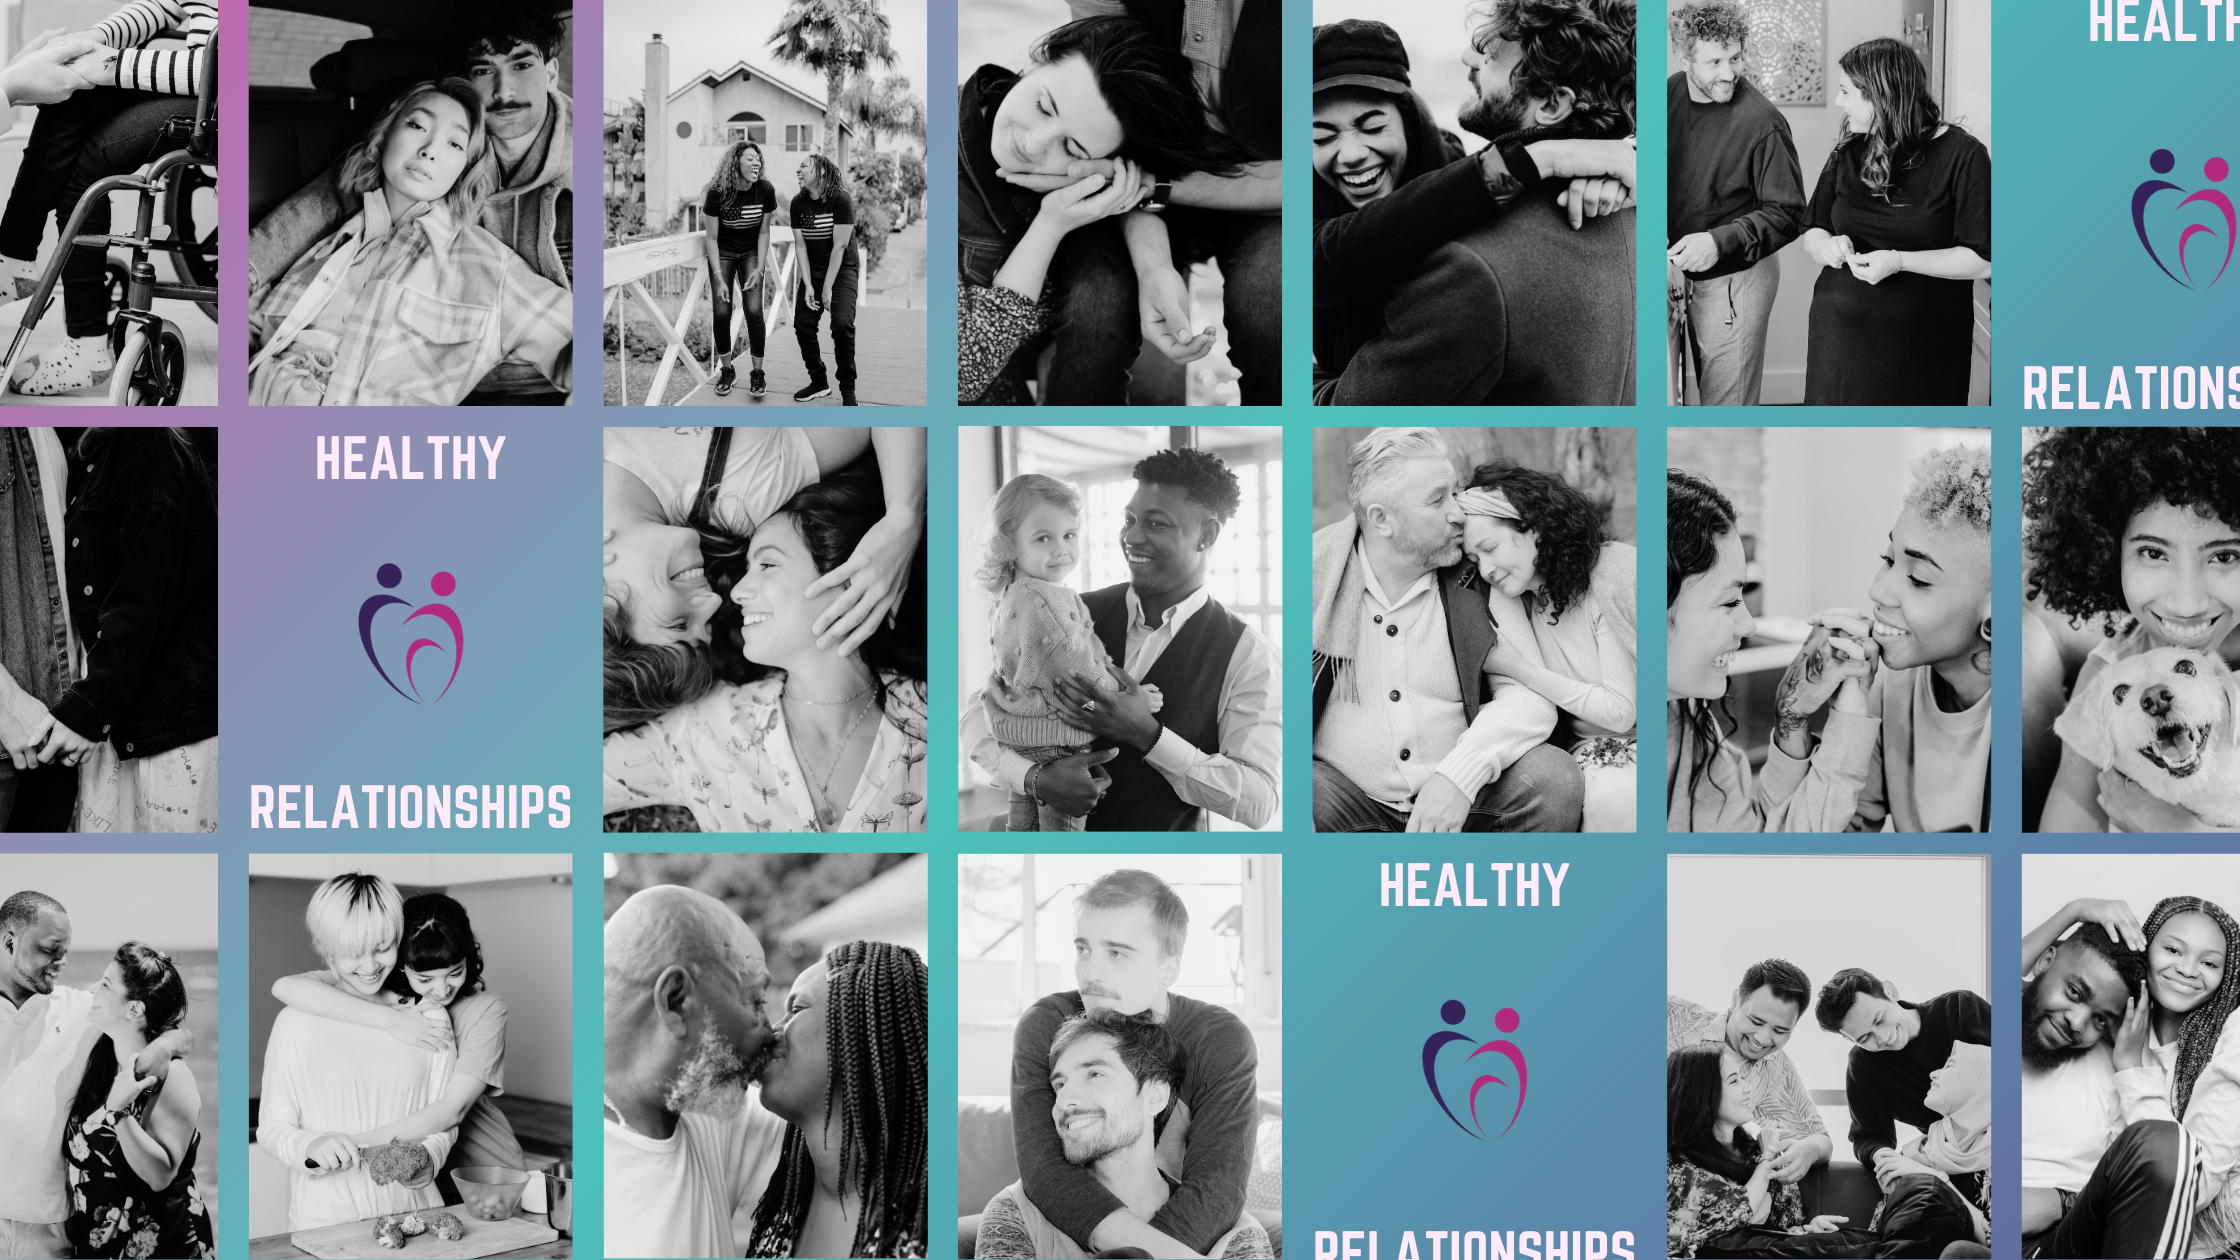 Black and white images of various types of couples demonstrating healthy relationships, diverse images.